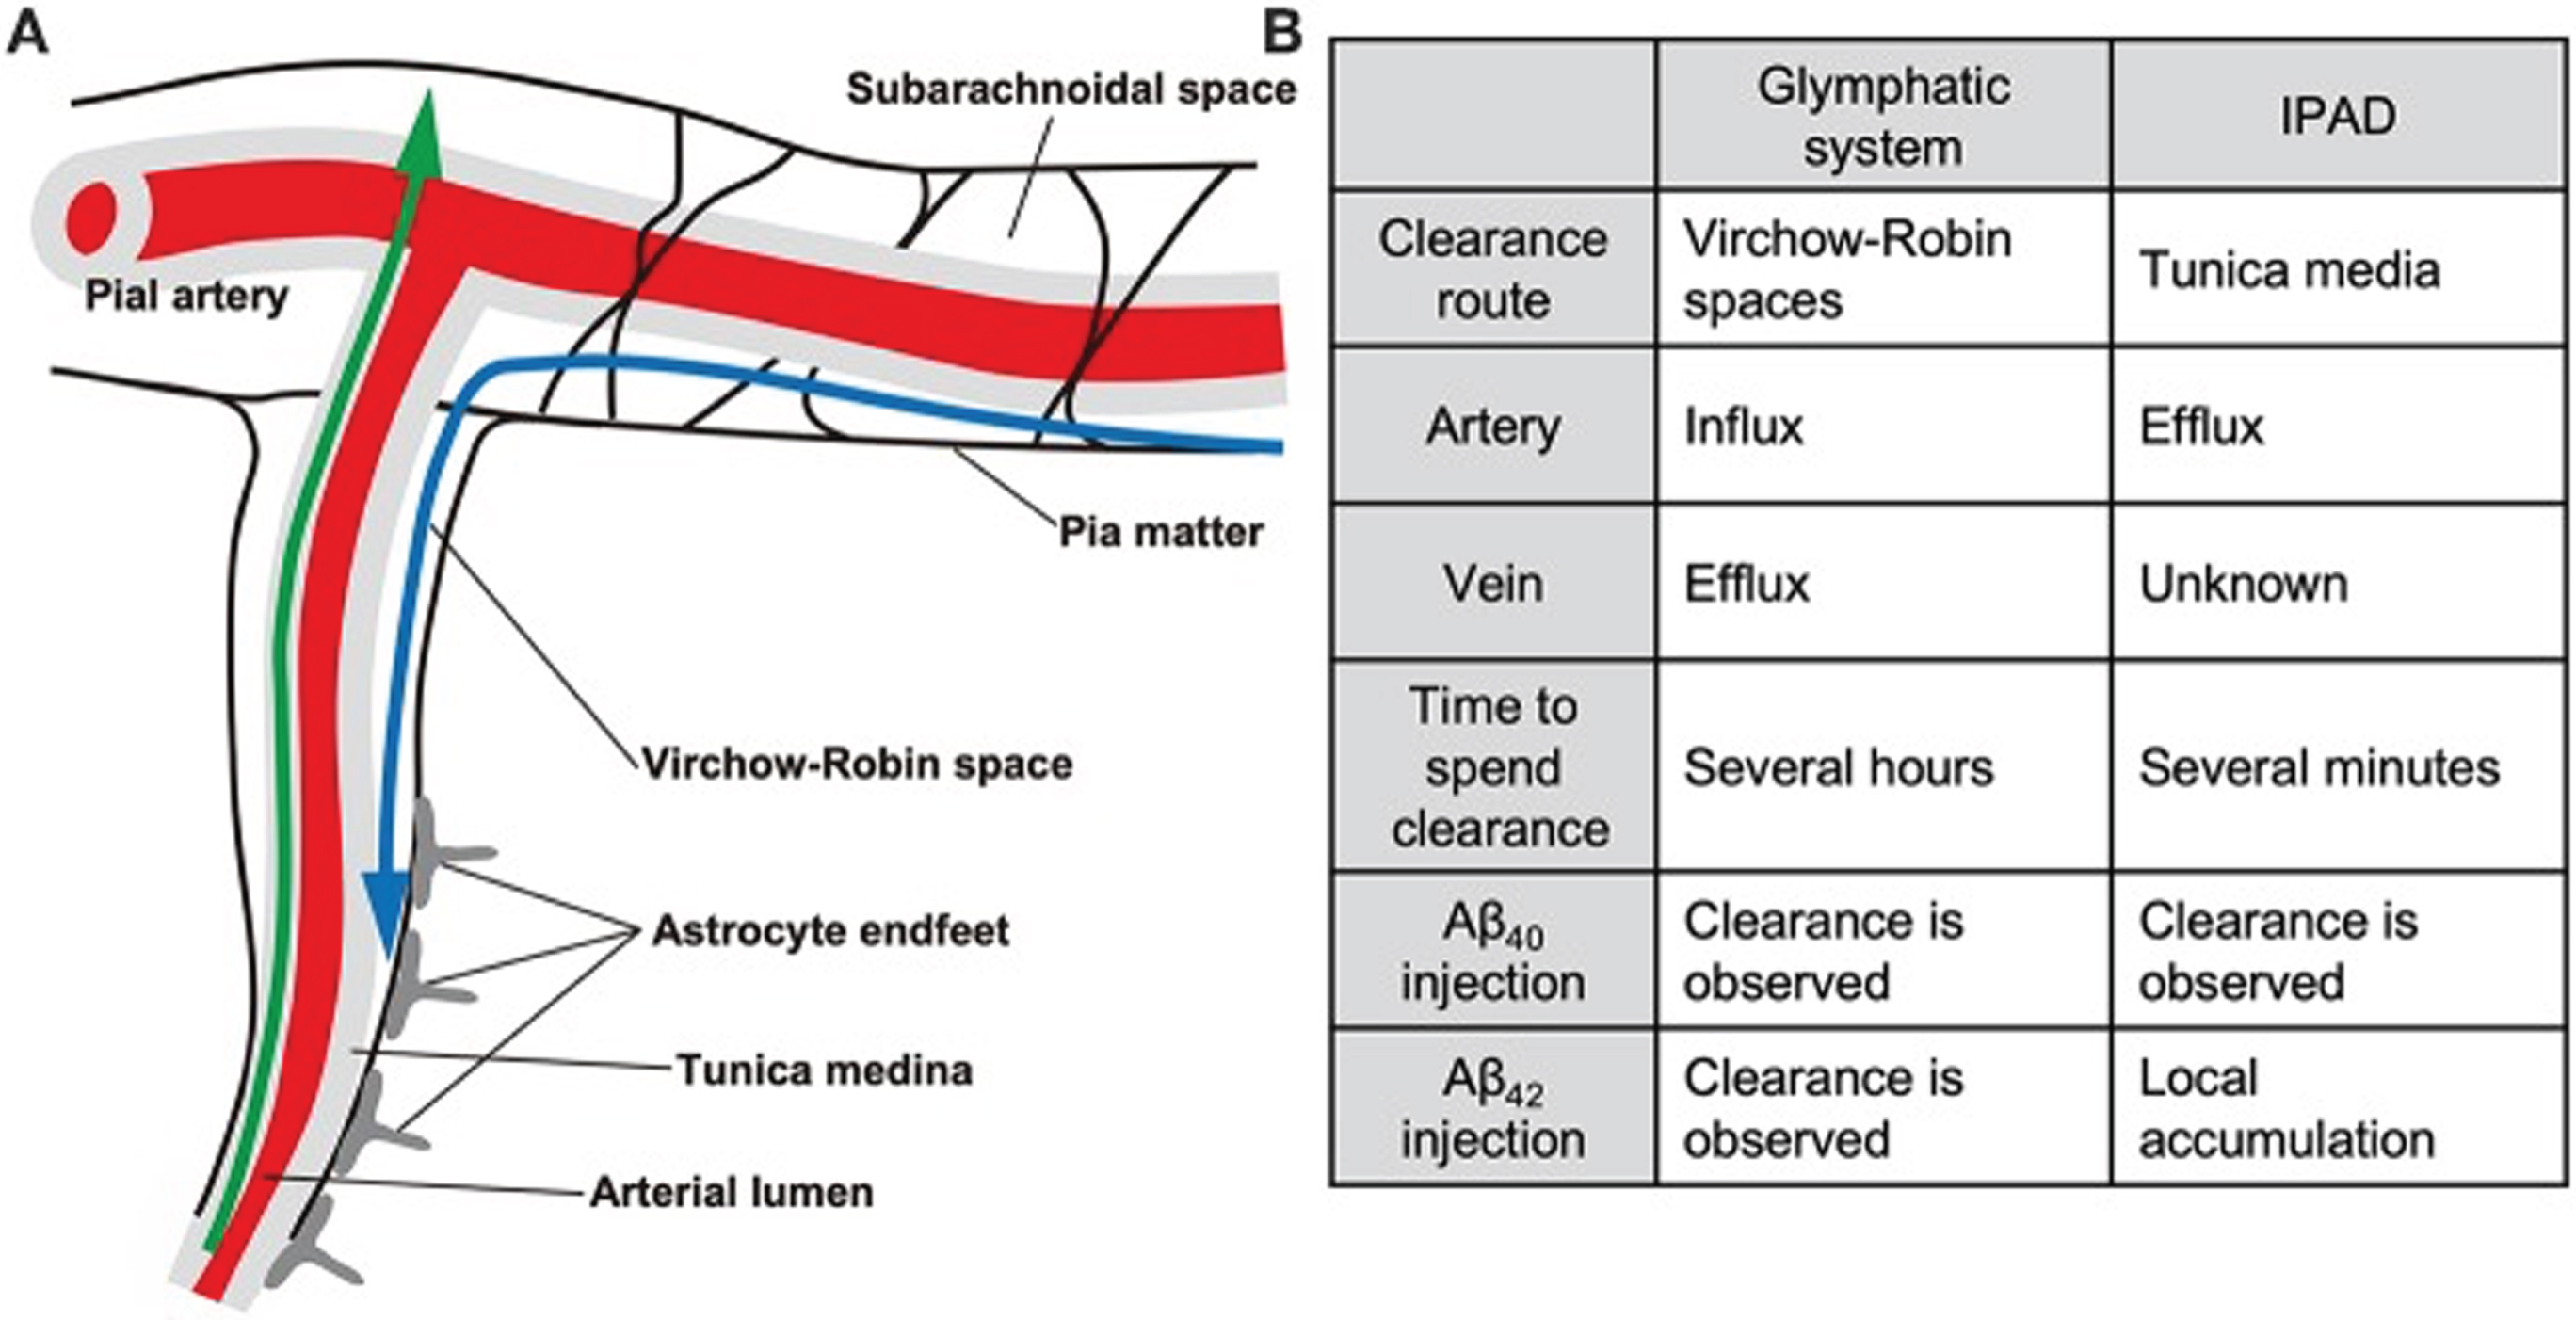 The glymphatic and intramural periarterial (IPAD) systems. In the glymphatic (paravascular) system, indicated by the blue arrow, Aβ and other solutes in interstitial fluid are cleared from the brain via the paravascular (Virchow-Robin) space, which surrounds both cerebral arteries and veins. This is facilitated by the water channel protein aquaporin-4 which is present in the astrocytic endfoot processes lining the cerebral microvasculature. CSF in the glymphatic system enters the brain through para-arterial spaces, mixes with interstitial fluid, then leaves the brain via paravenous spaces. In the IPAD system, indicated by the green arrow, solutes (including Aβ) and interstitial fluid exit the brain via basement membranes of capillaries and arteries. Drainage of solutes via IPAD is in the opposite direction to that of cerebral blood flow. The pattern of drainage of solutes via IPAD is similar to the pattern of deposition of Aβ found in CAA, i.e., along cerebral arteries and capillaries. (From: Saito S, Yamamoto Y, Ihara M. Development of a Multicomponent Intervention to Prevent Alzheimer’s Disease. Front Neurol. 2019;10 : 490 [publisher: Frontiers Media S.A].) This figure is copyrighted by Drs. Saito, Yamamoto, and Ihara, who permitted its reproduction.